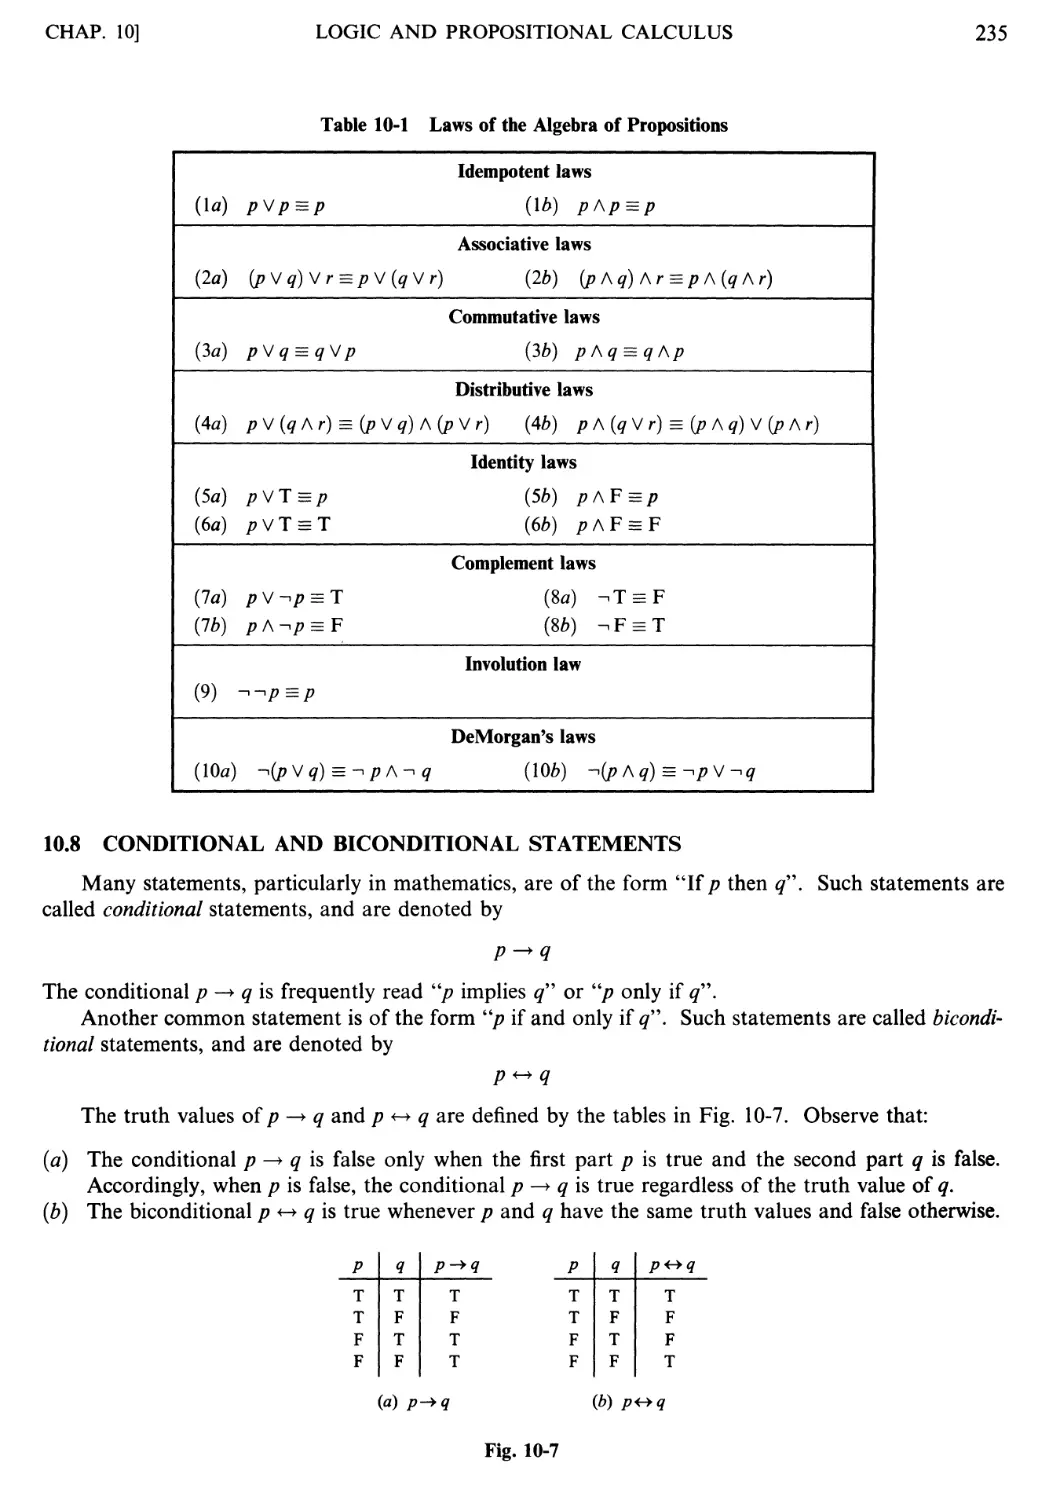 10.8 Conditional and biconditional statements